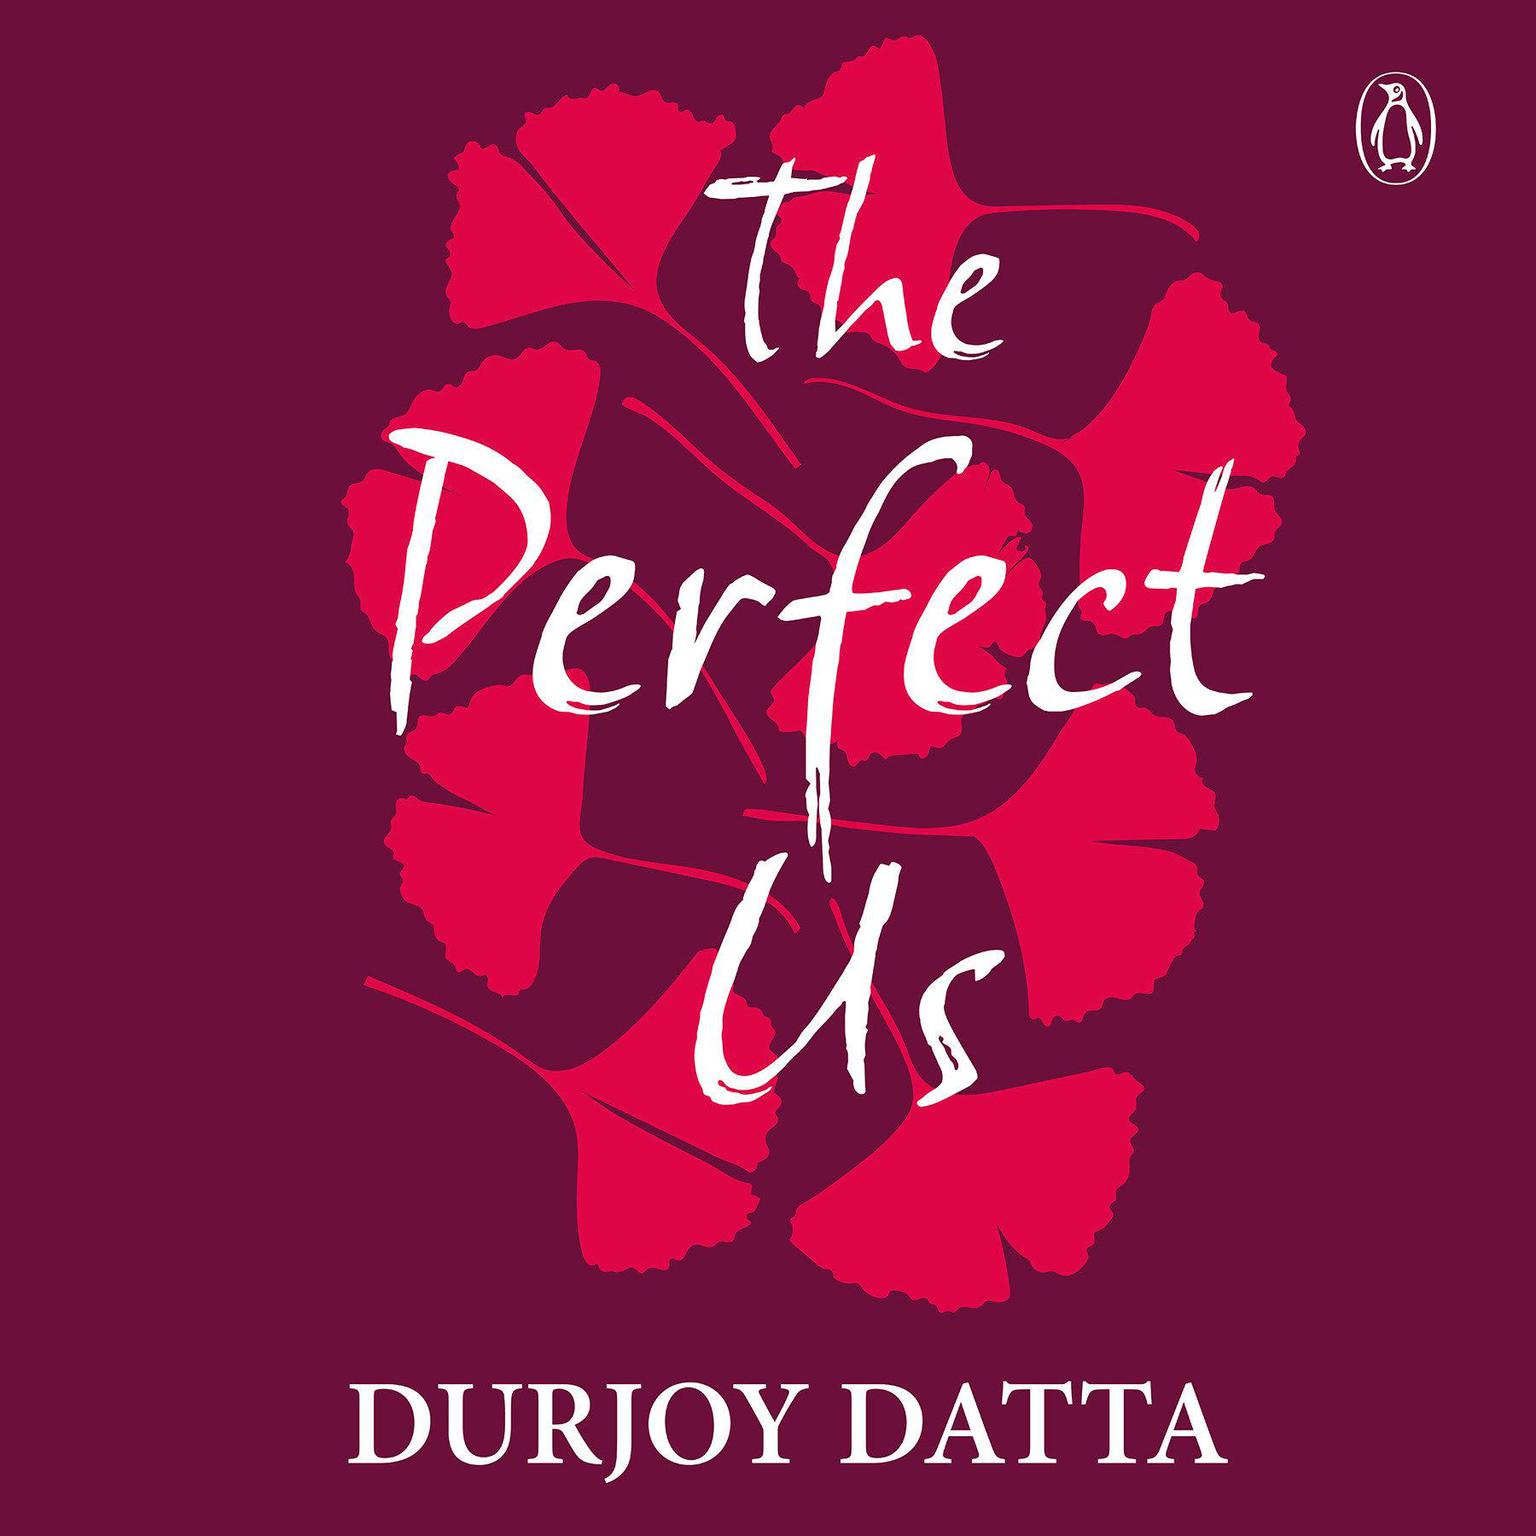 The Perfect Us Audiobook, by Durjoy Datta